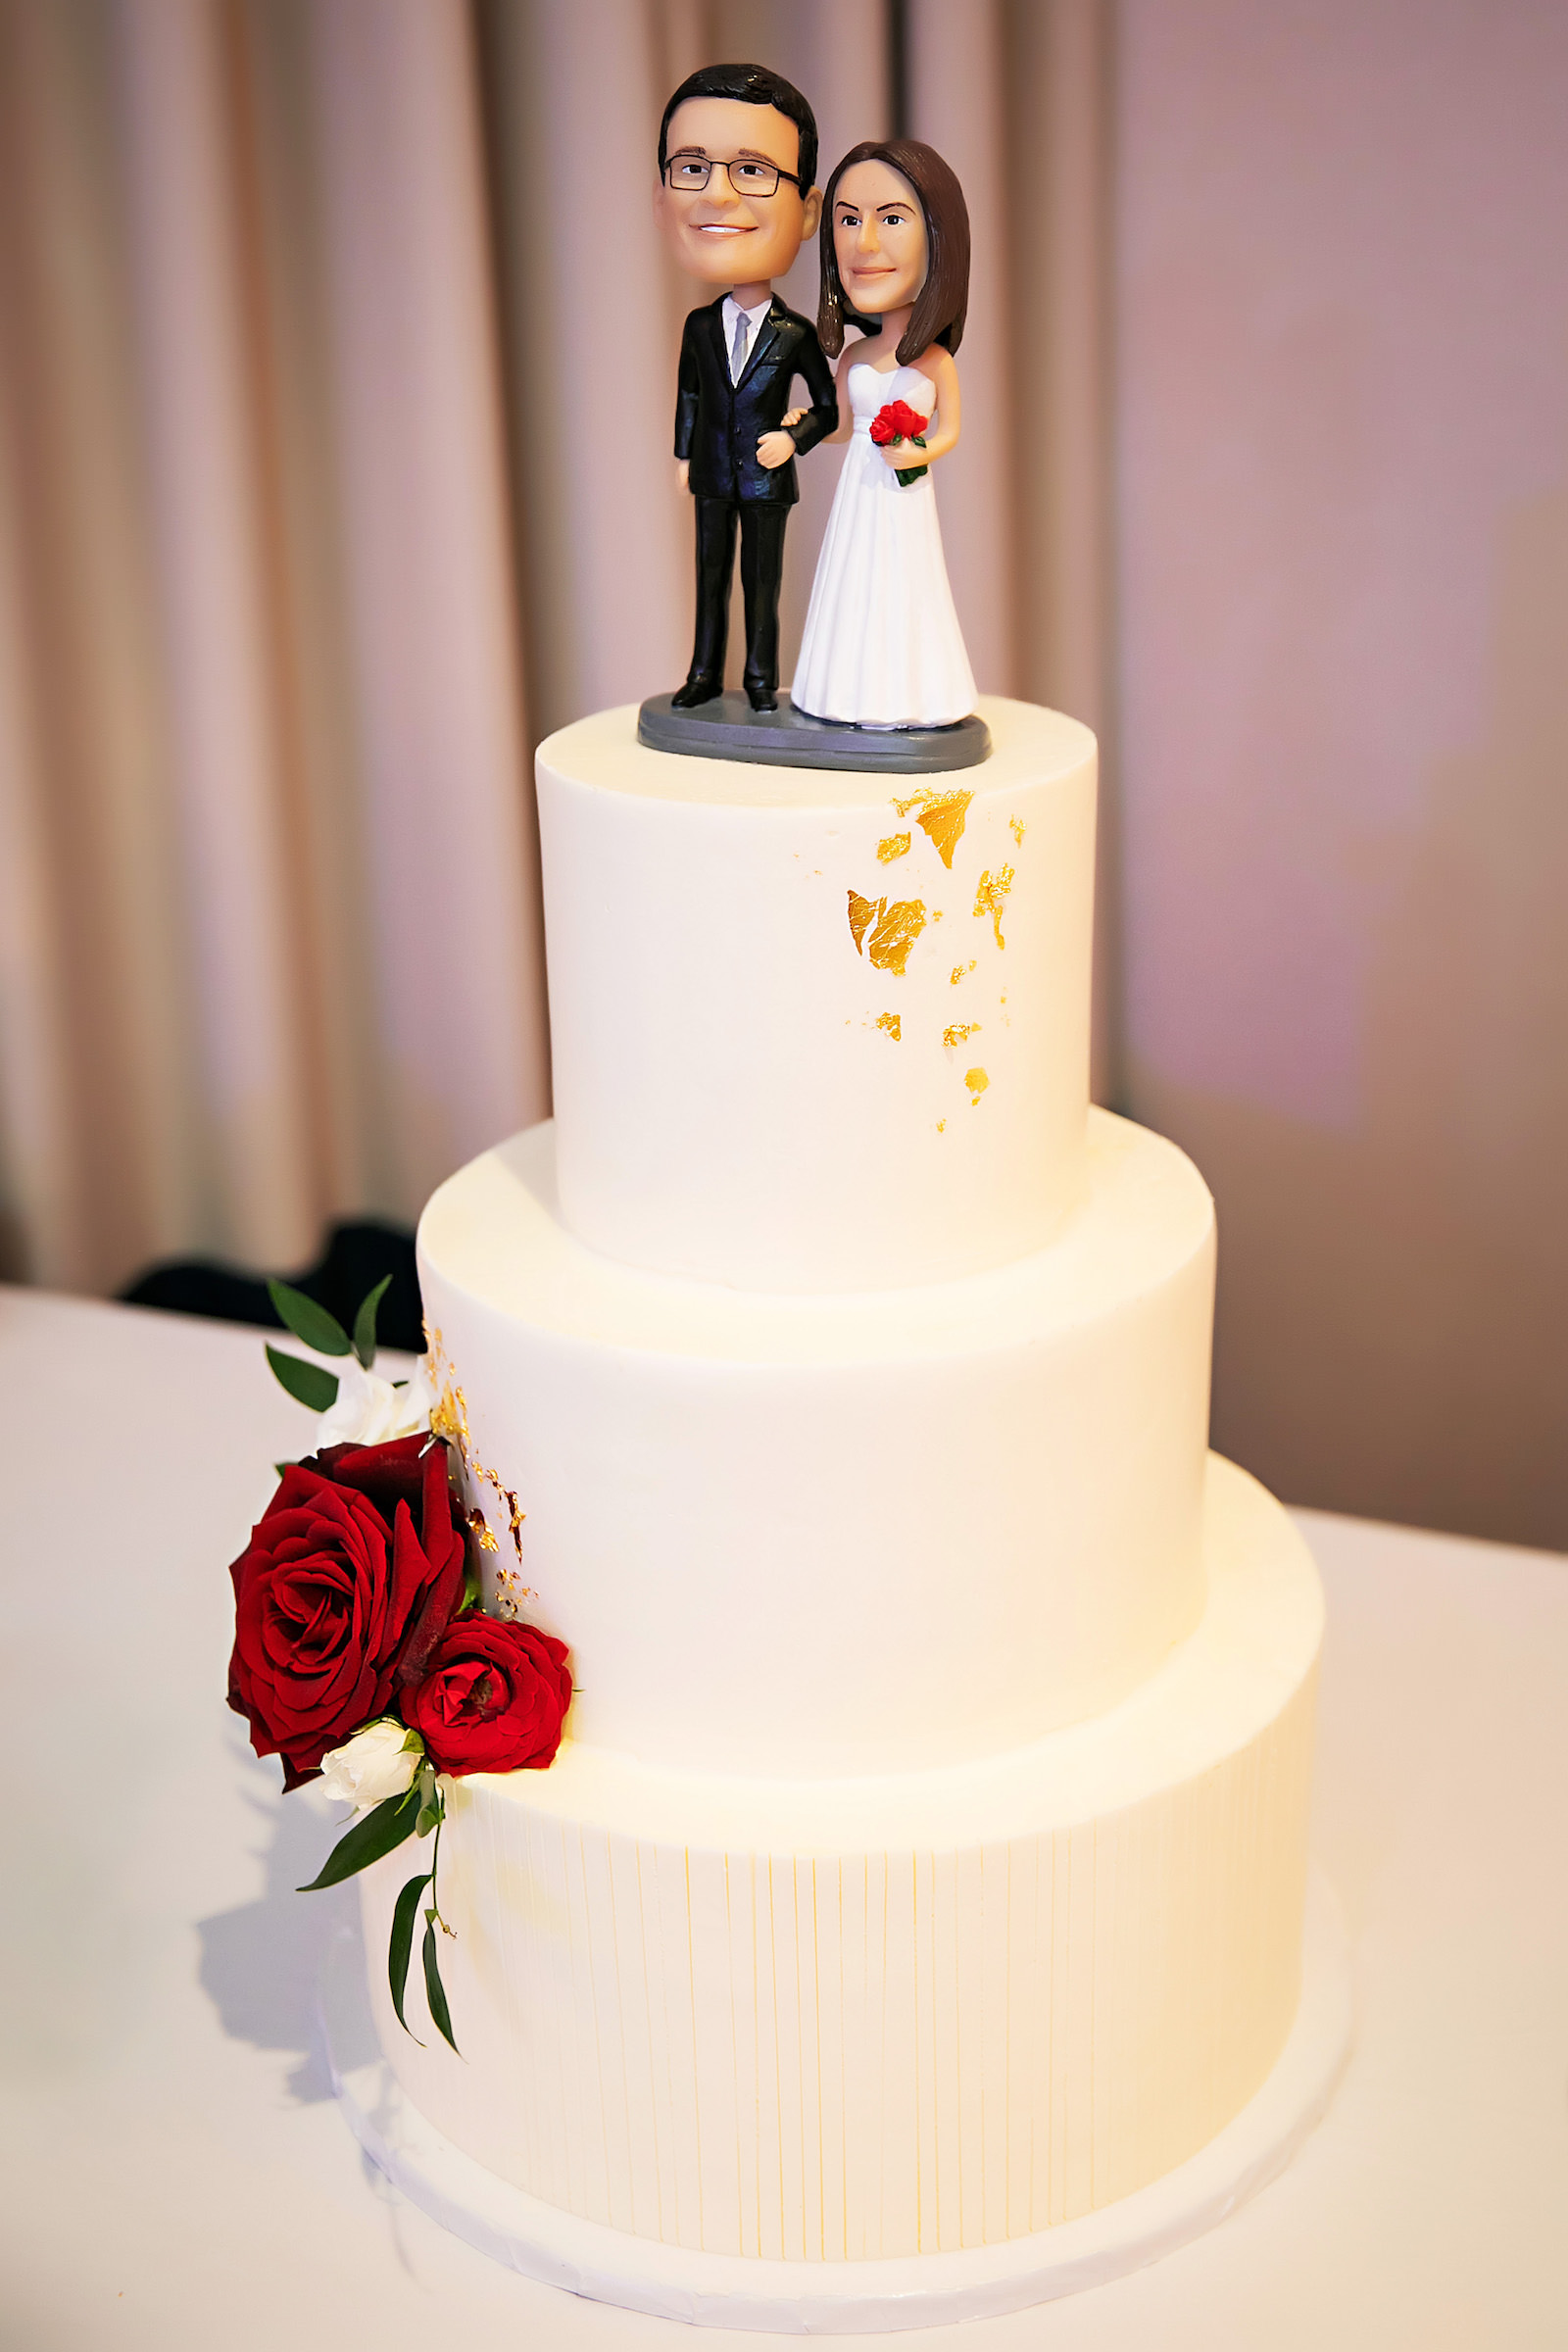 Three Tier White Wedding Cake with Rose Detail and Bobble Head Cake Toppers | Florida Wedding Baker The Artistic Whisk